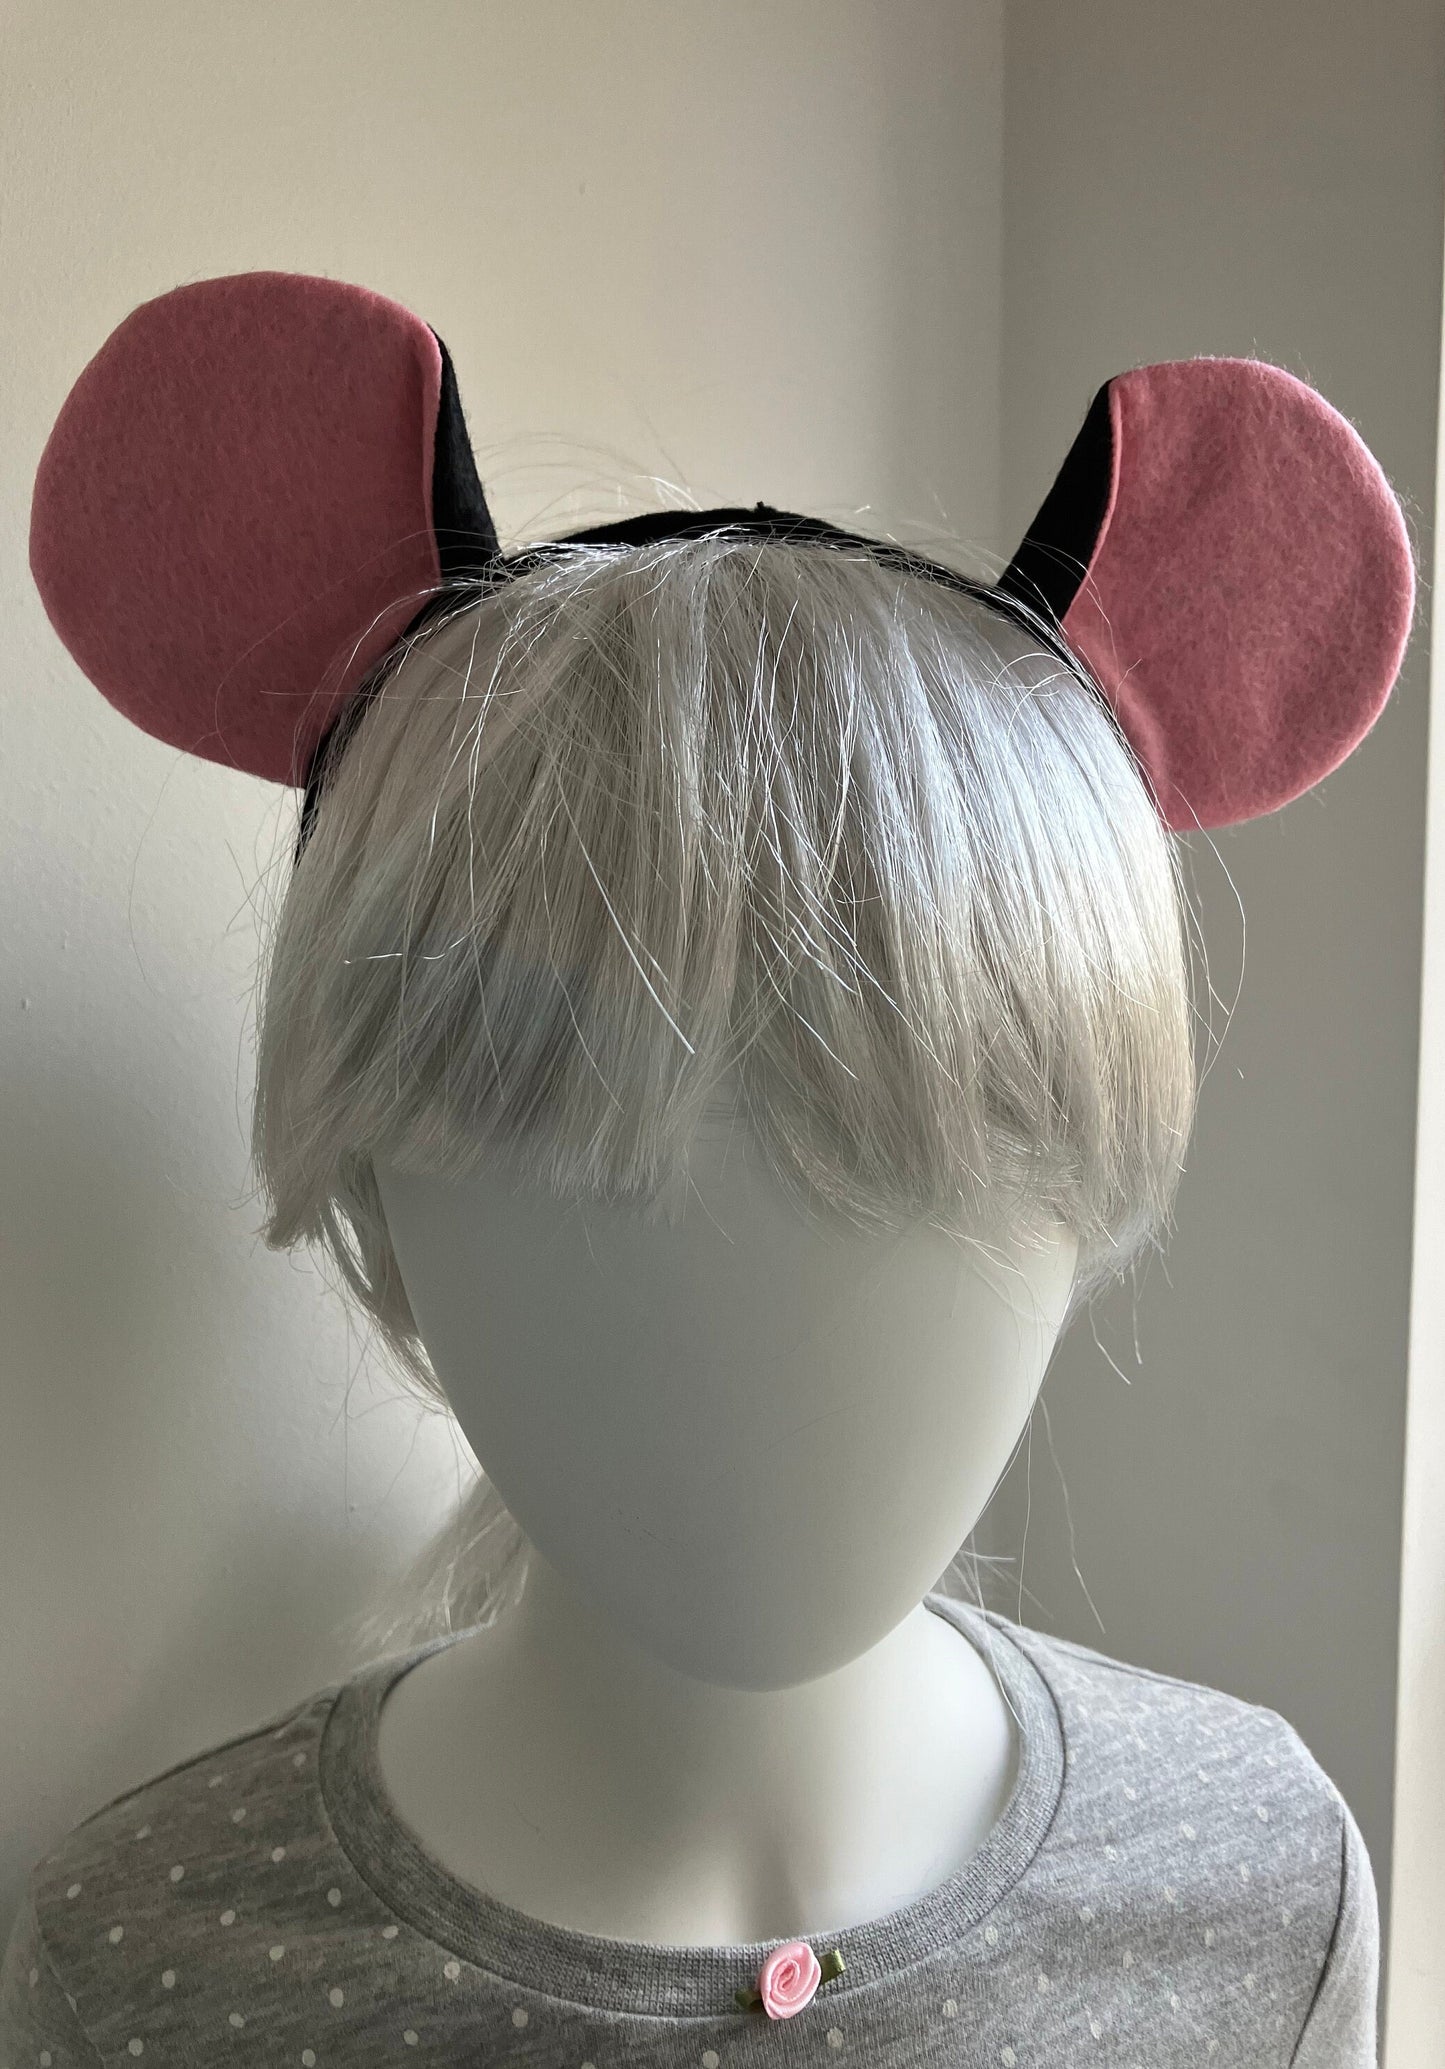 Mouse Ears Hairband with Extra Large Mouse Ears Made of Black Felt